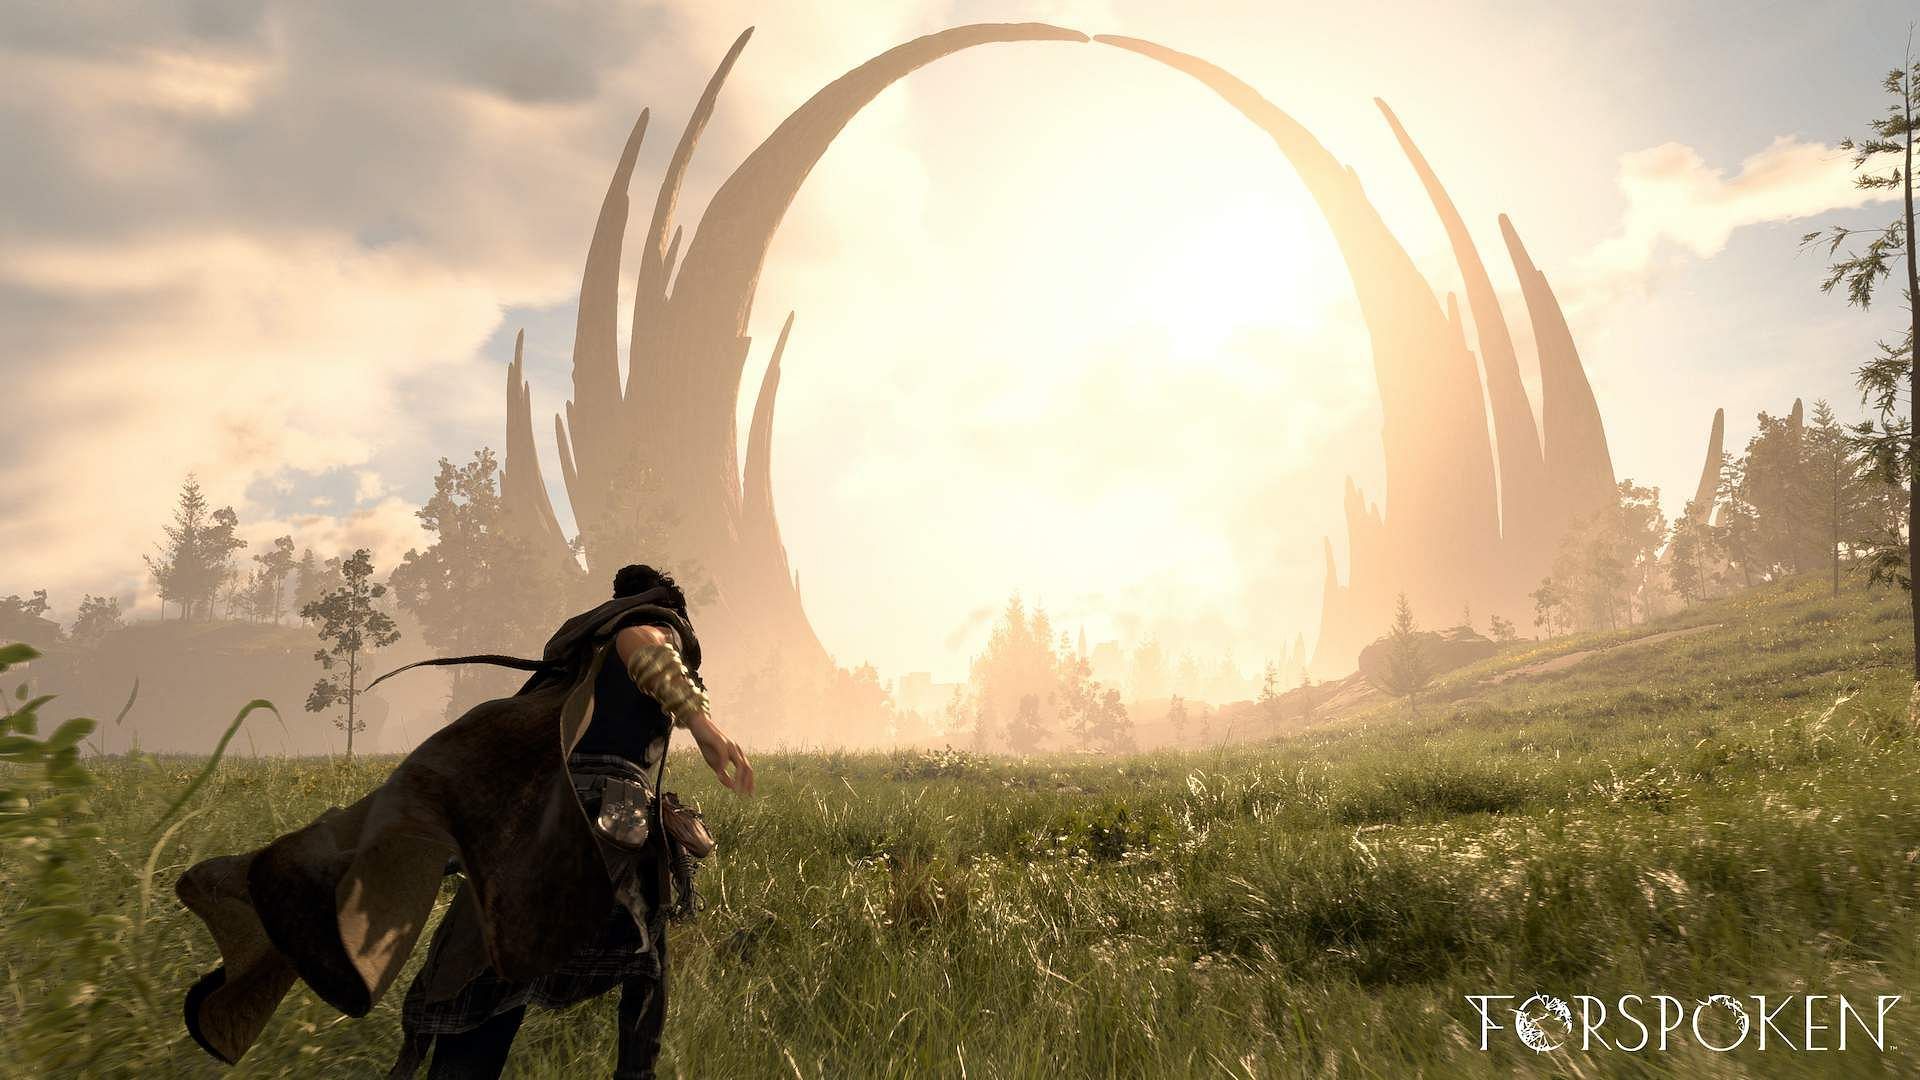 The open world is as dangerous as it is beautiful (Image via Square Enix)